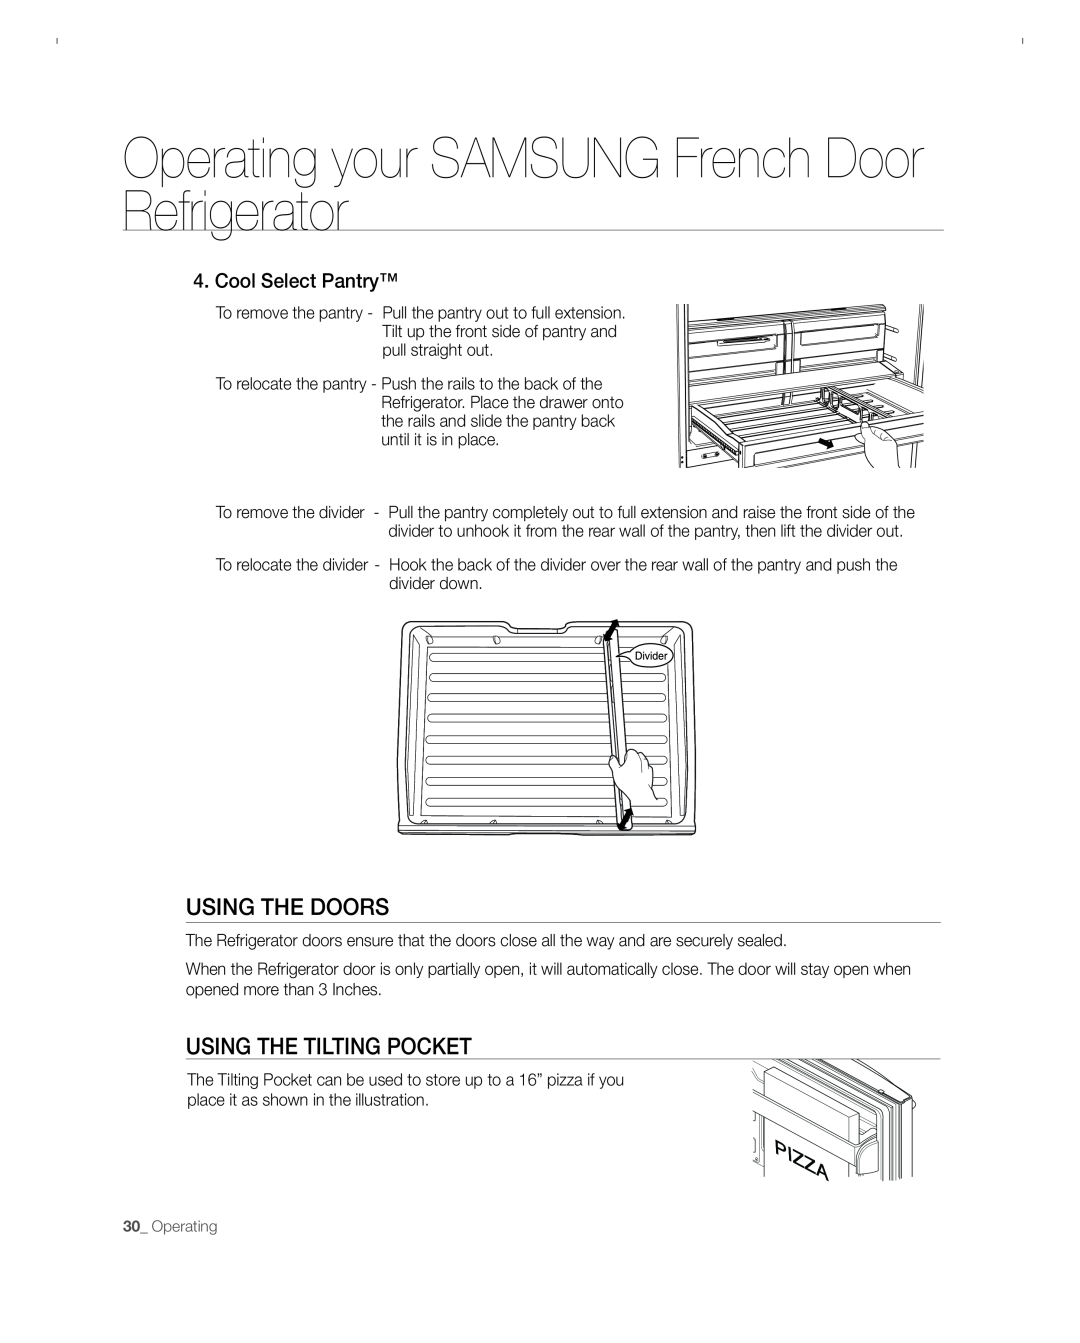 Samsung RFG297ACBP user manual using tHe DooRs, usinG tHE tiLtinG PoCKEt, Operating your SAMSUNG French Door Refrigerator 